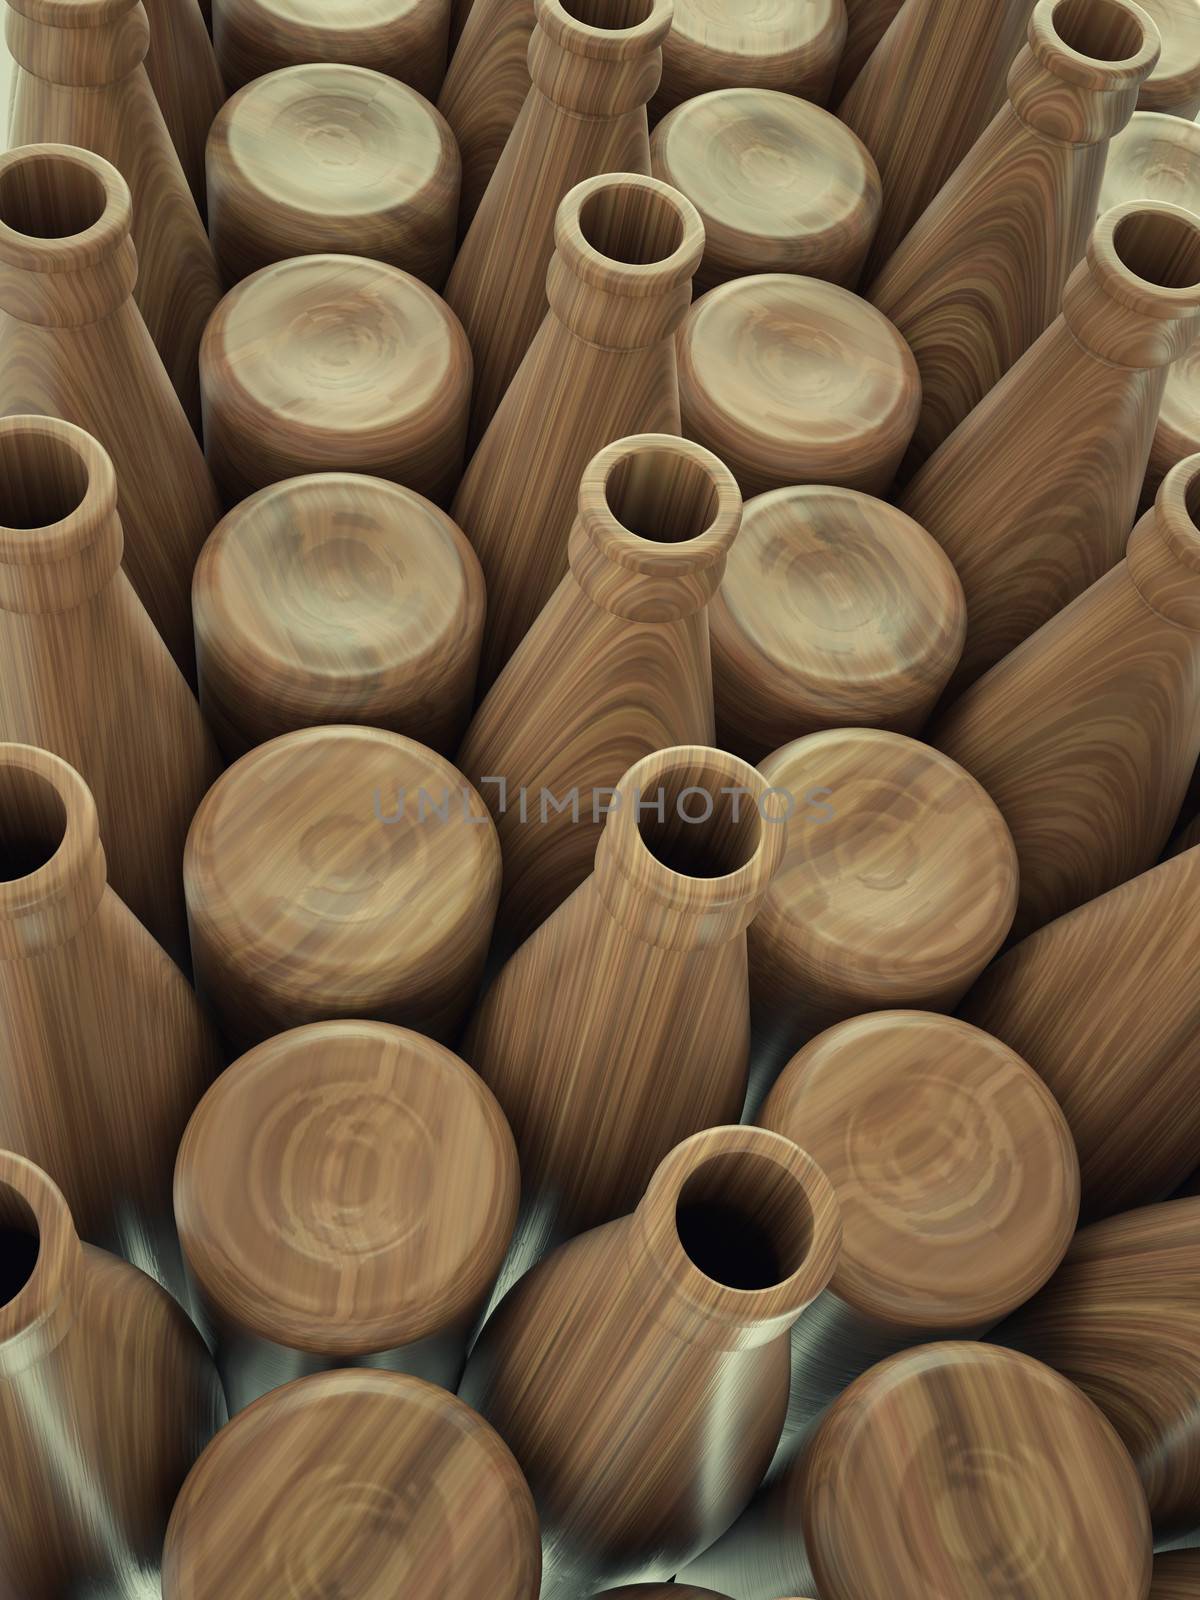 Storage of empty wooden bottles for wine or beer. Large resolution